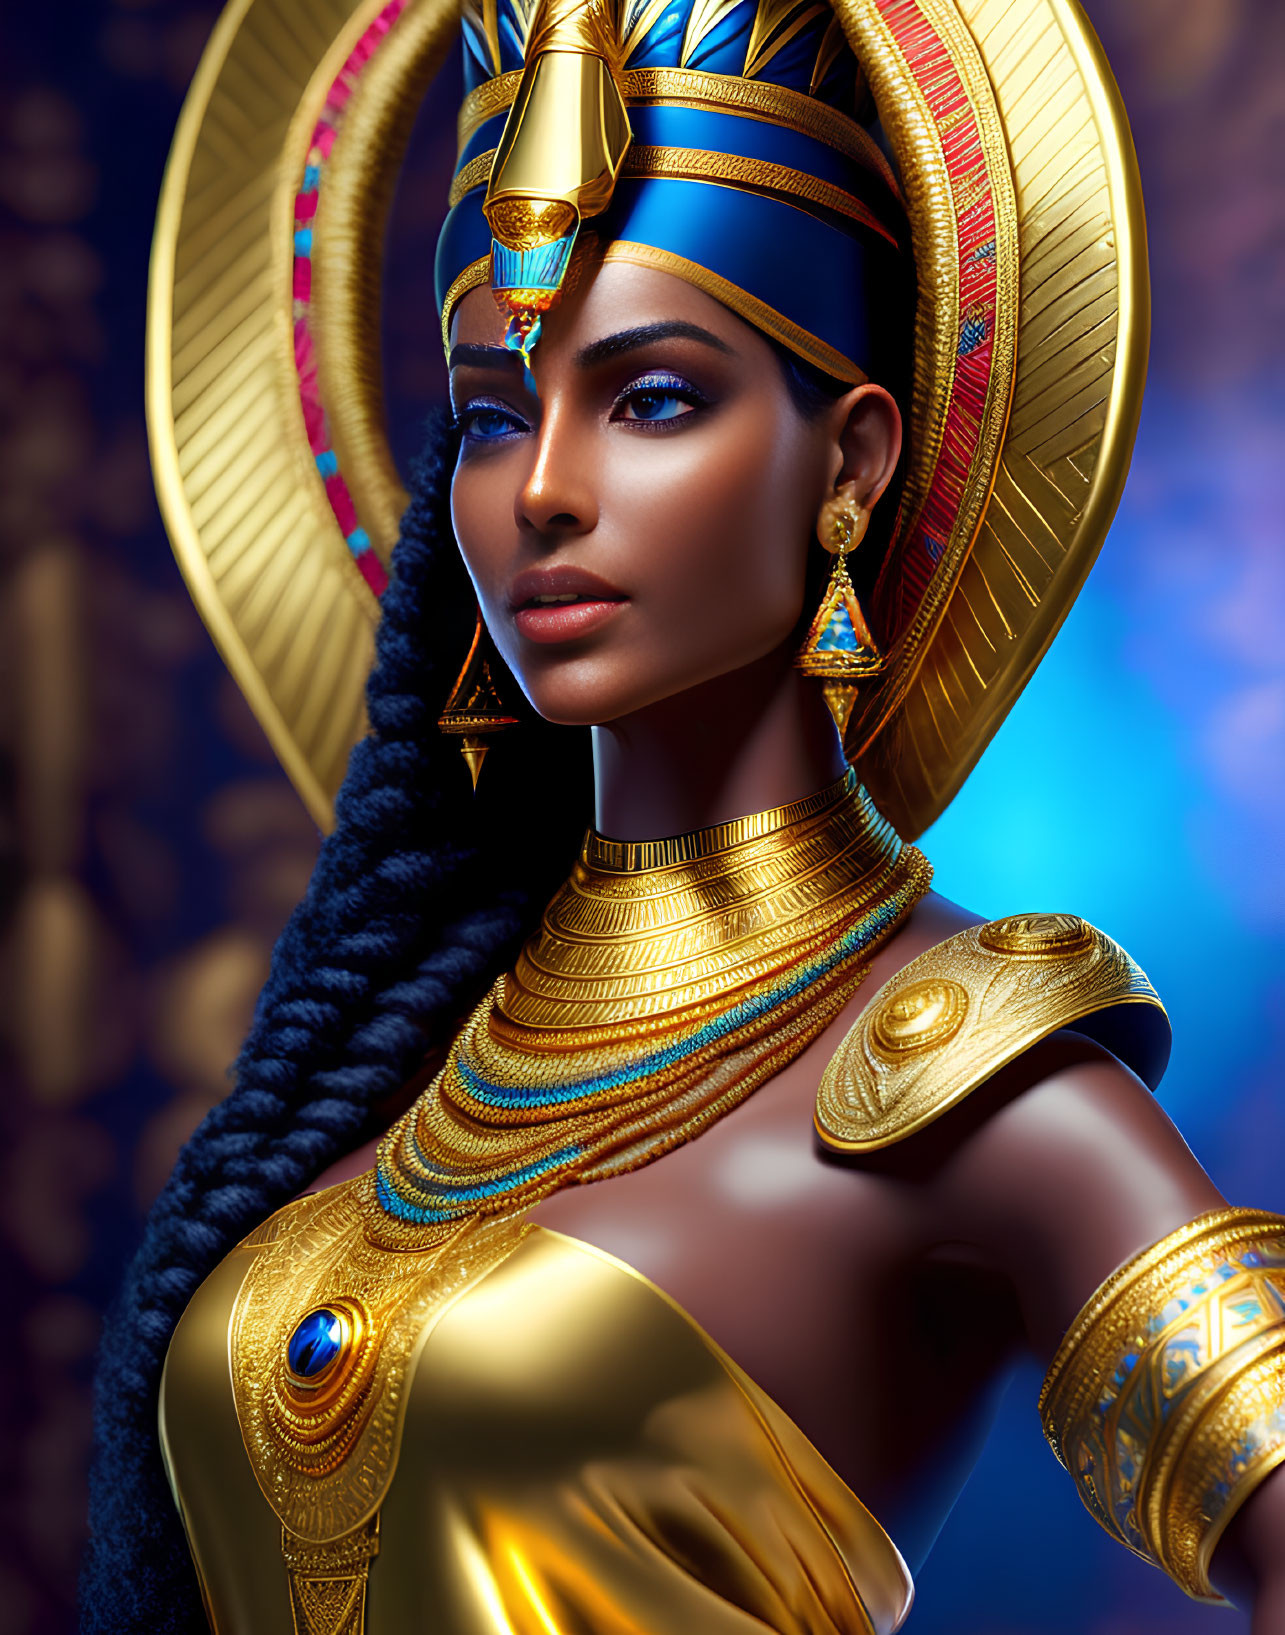 Digital artwork of a woman in ancient Egyptian attire with gold jewelry and headdress